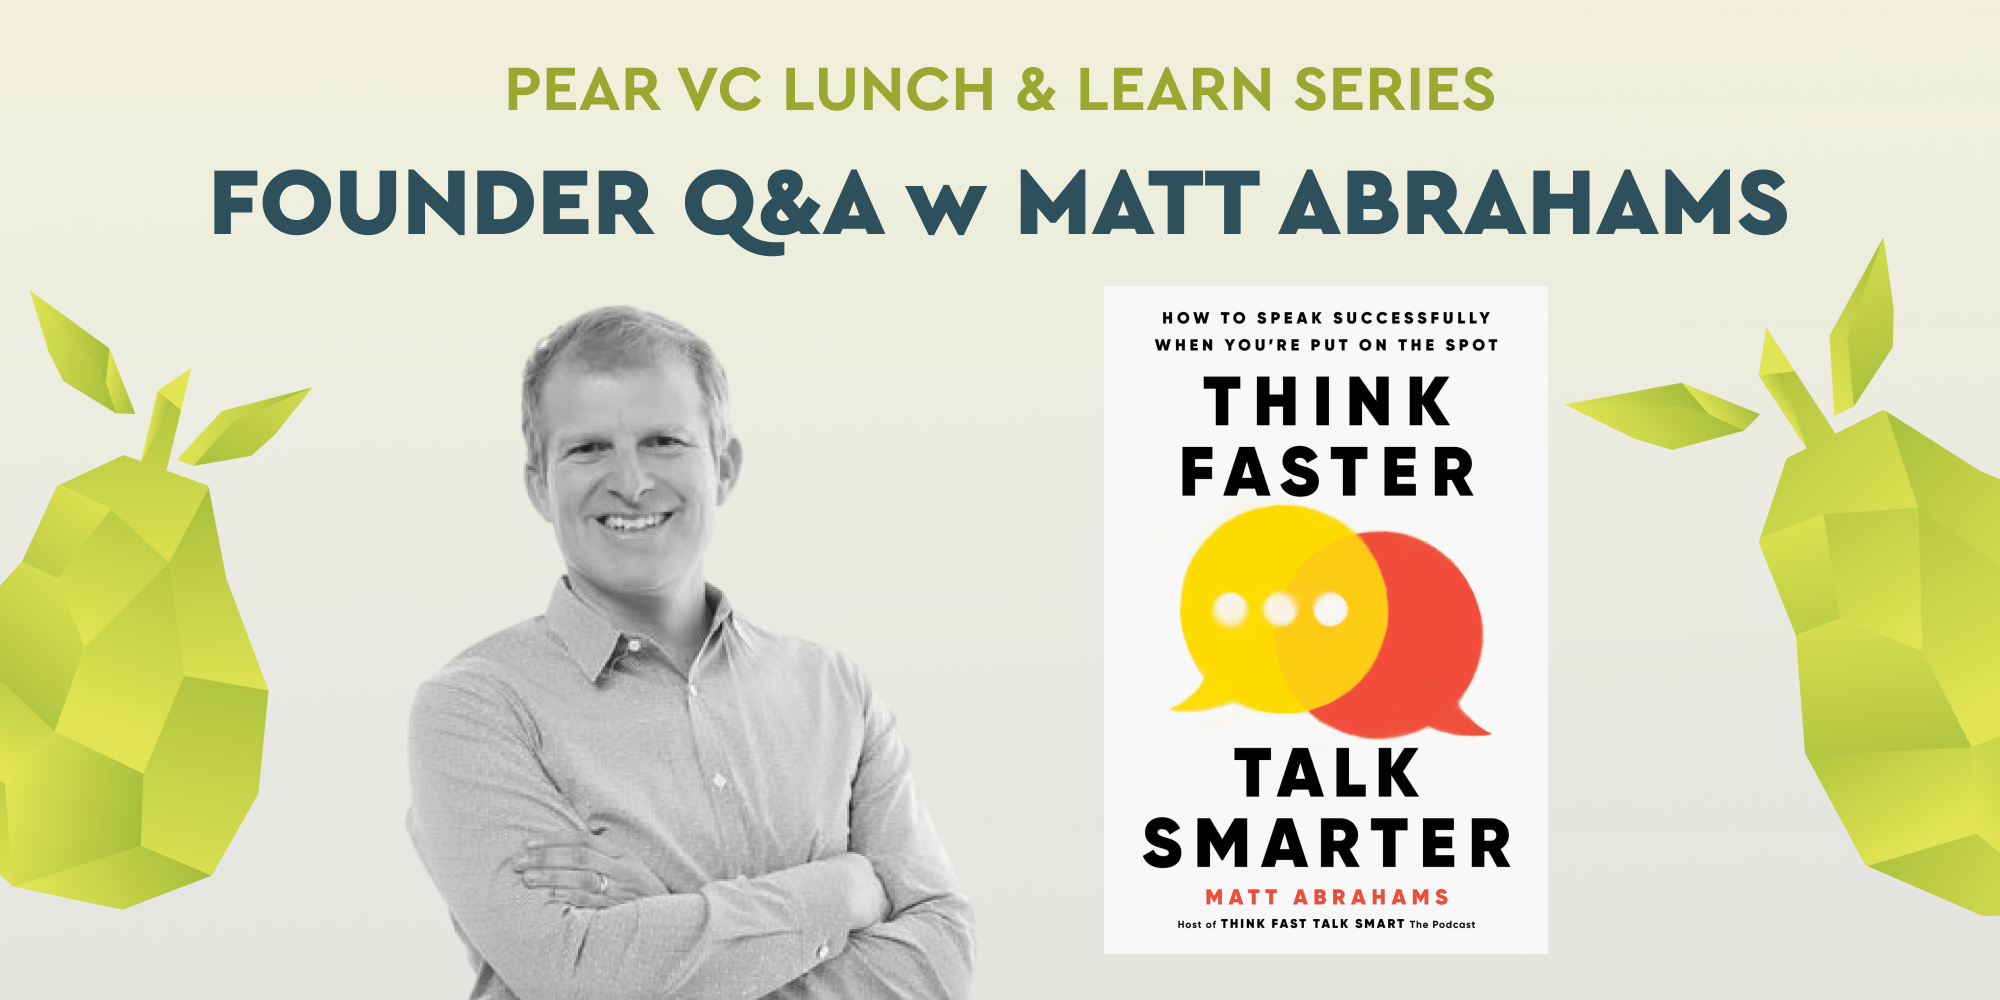 event Founder Lunch & Learn with Matt Abrahams at Pear VC